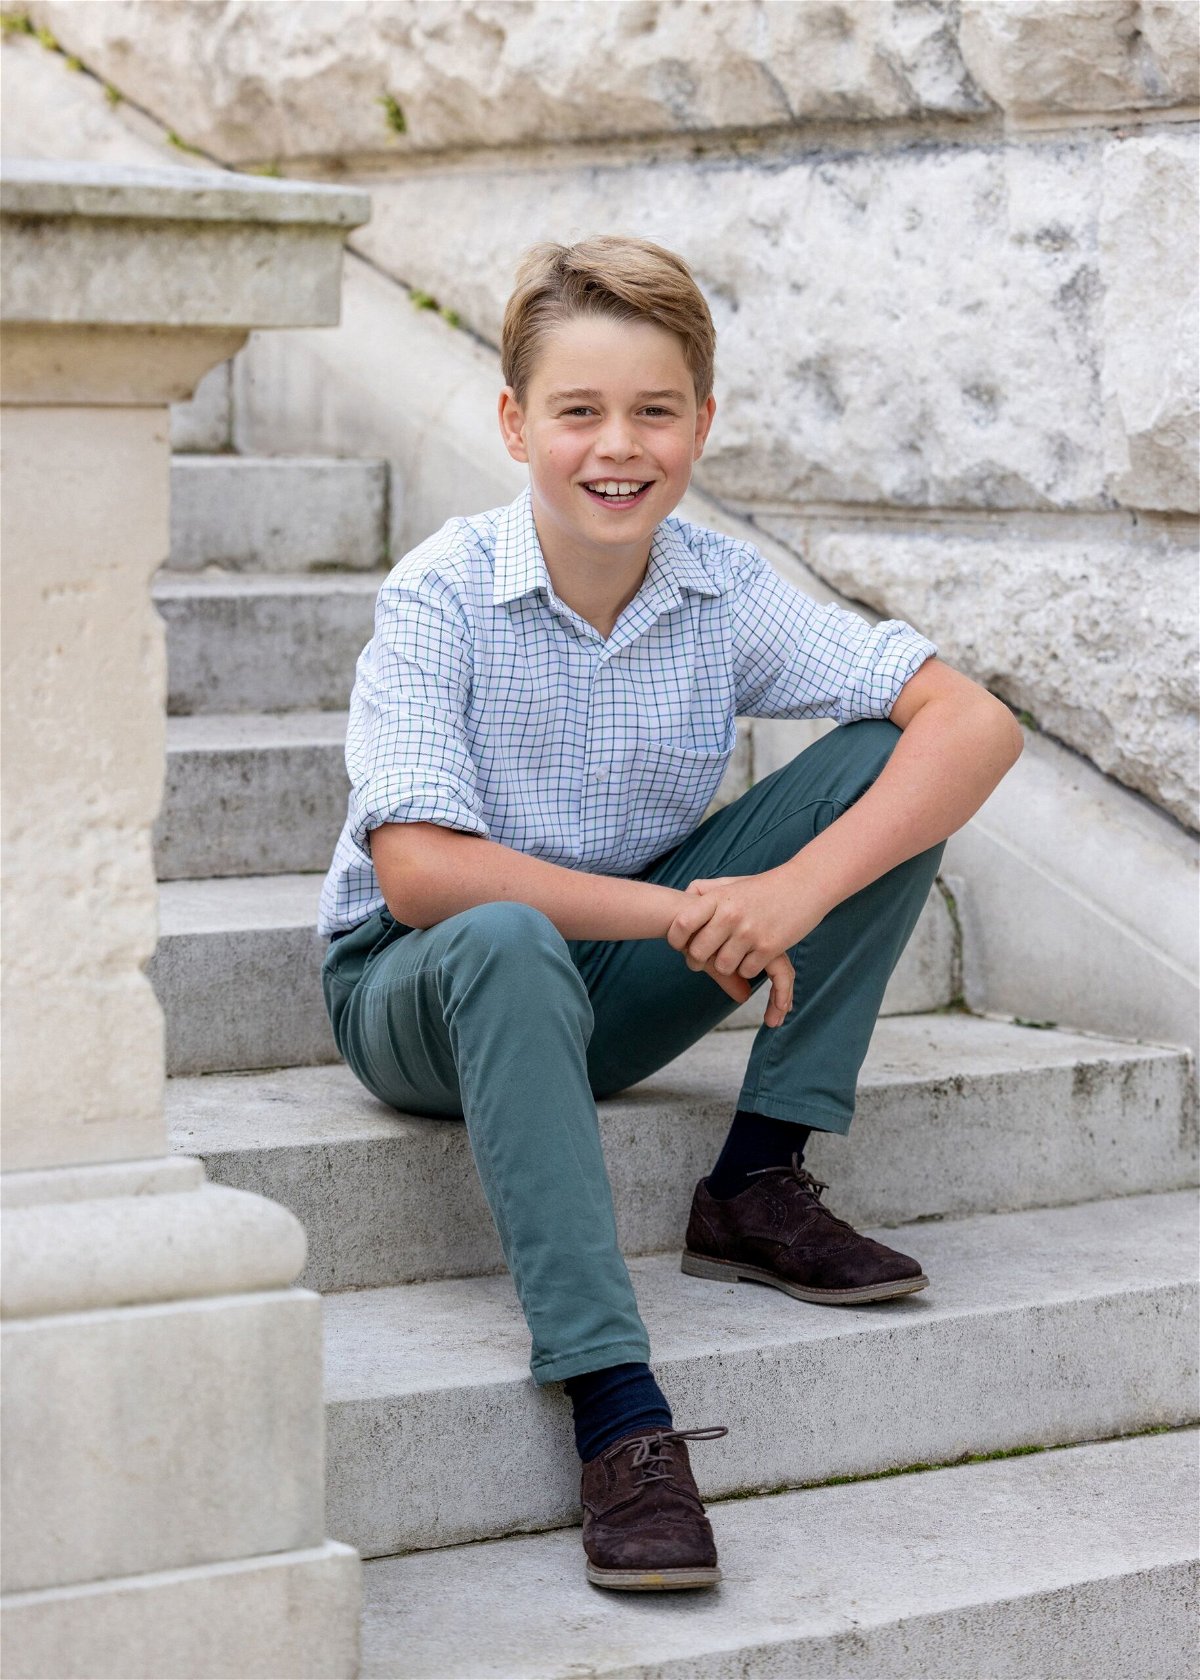 <i>Millie Pilkington/Kensington Palace/PA Wire/Handout/Reuters</i><br/>Britain's Prince George poses in this undated handout picture released by Kensington Palace on July 21.